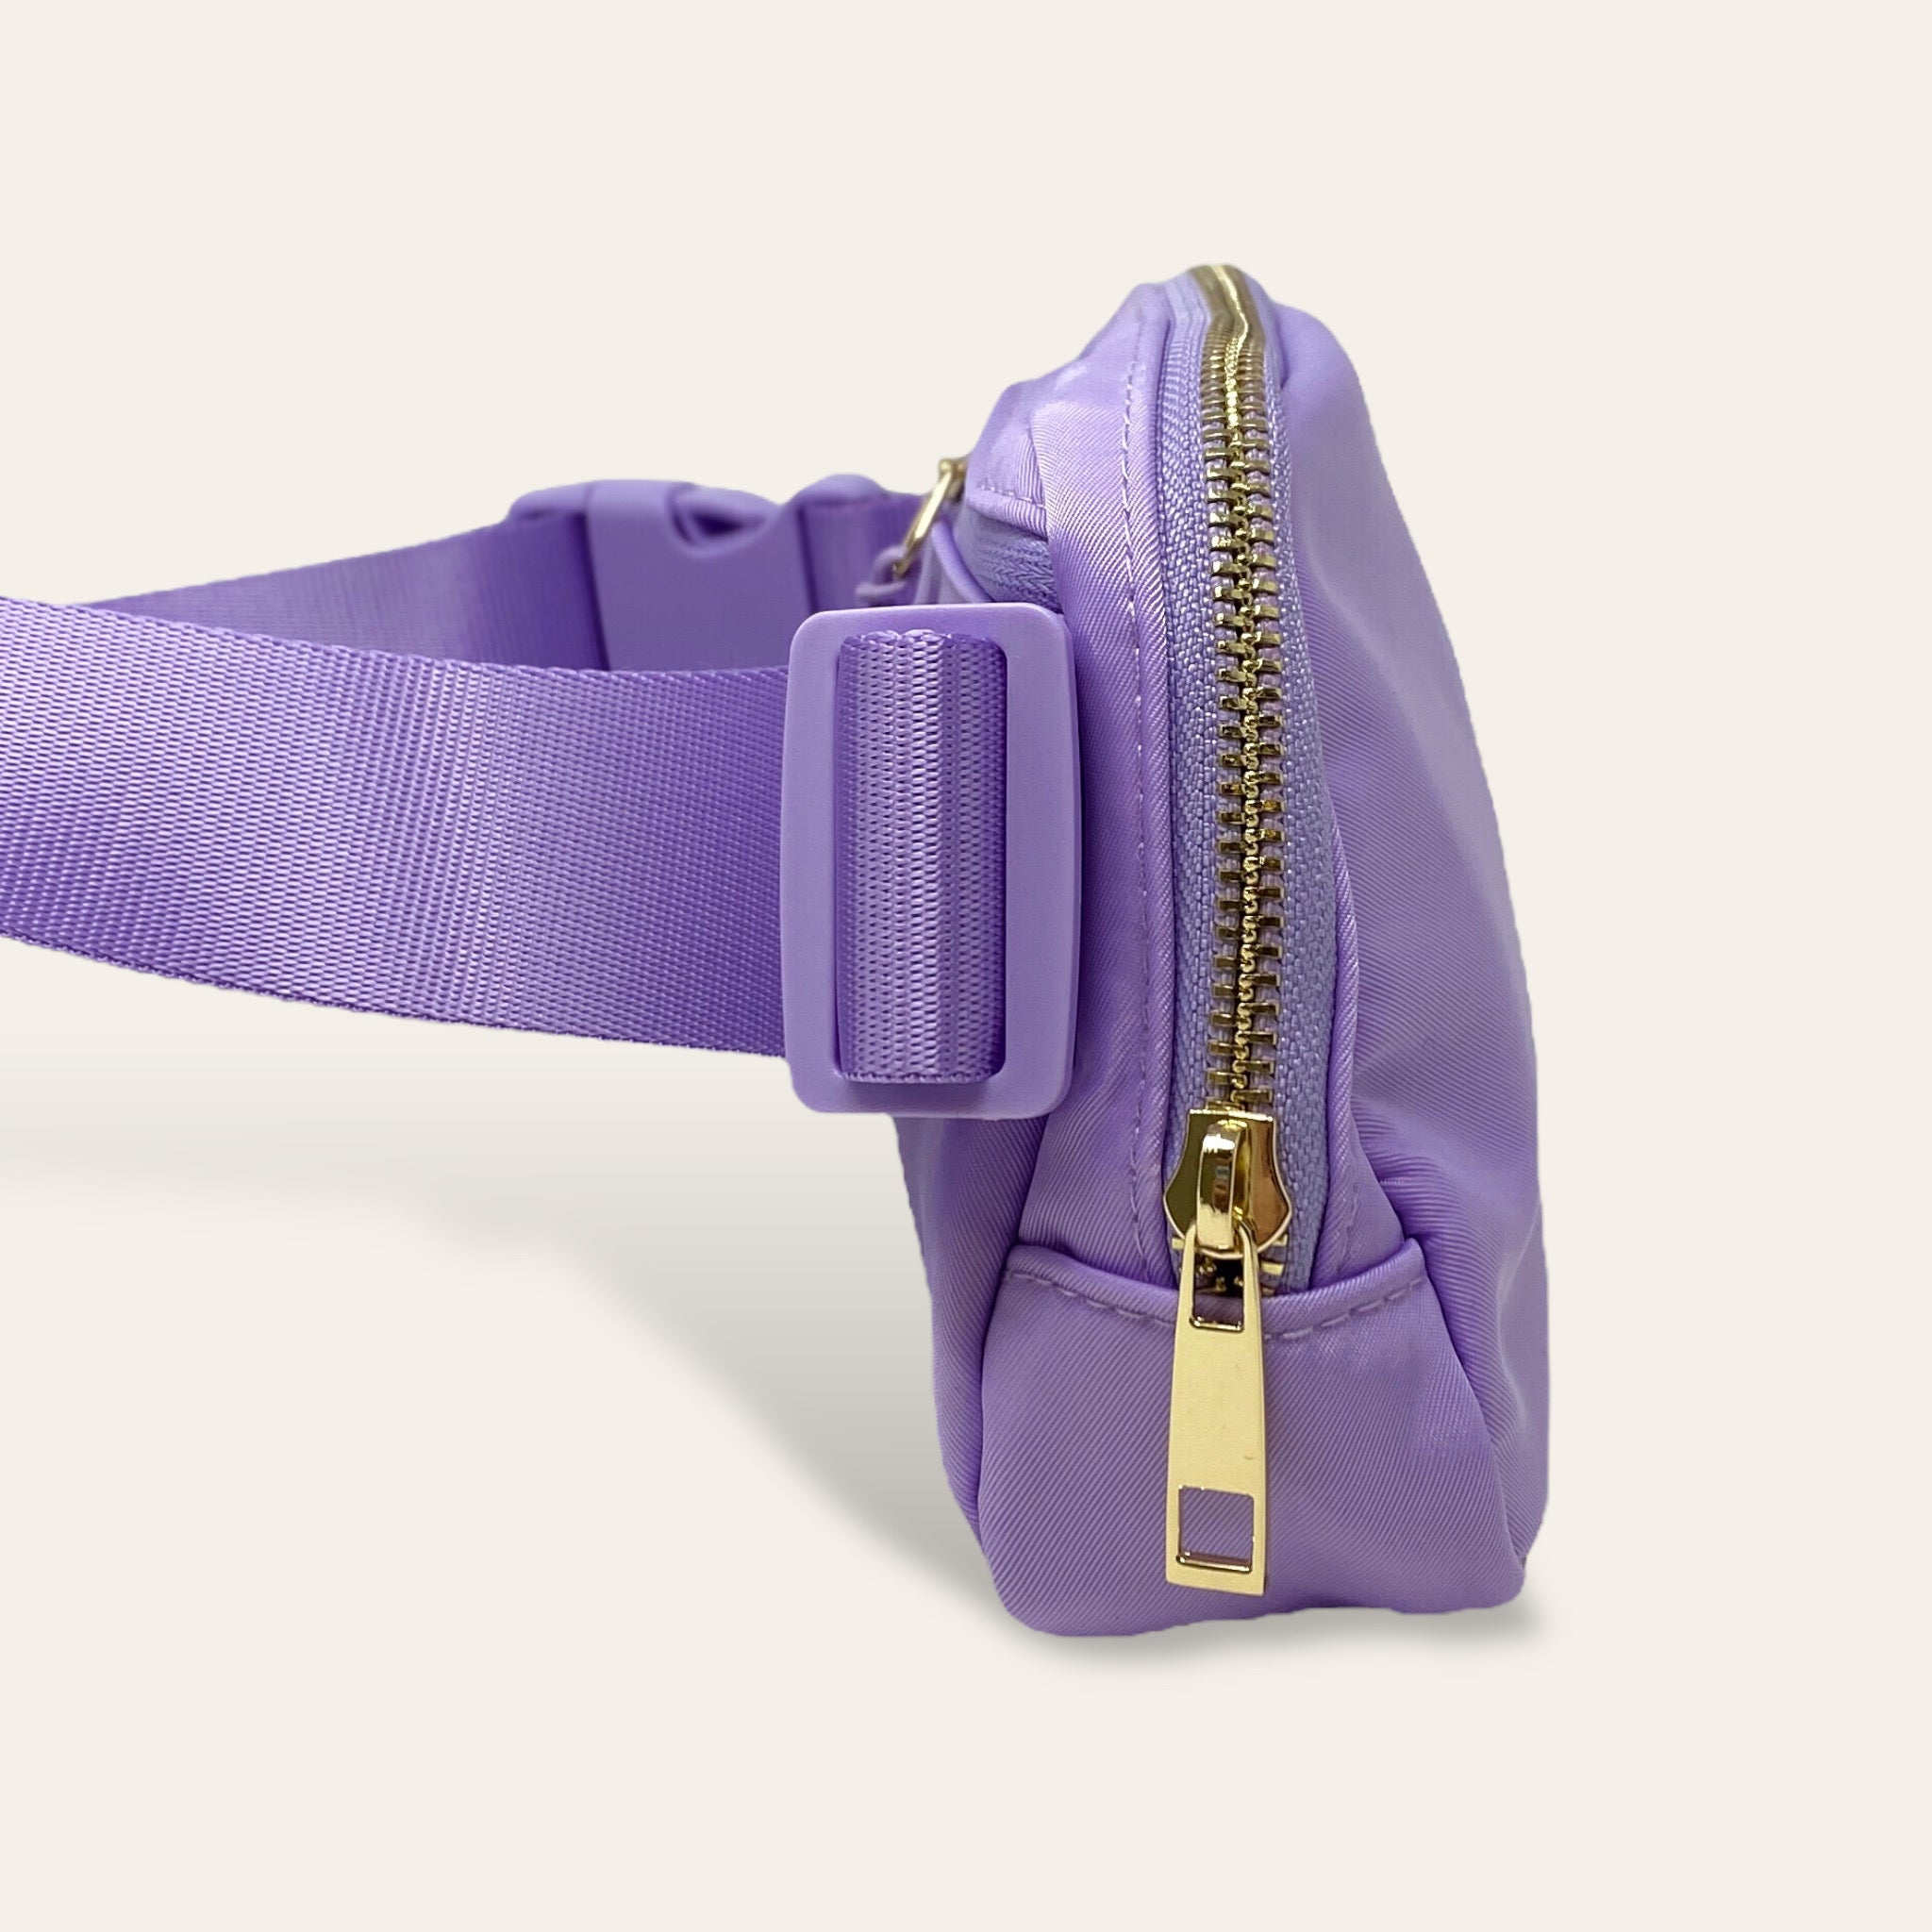 All You Need Belt Bag with Hair Scarf - Luxe Lilac